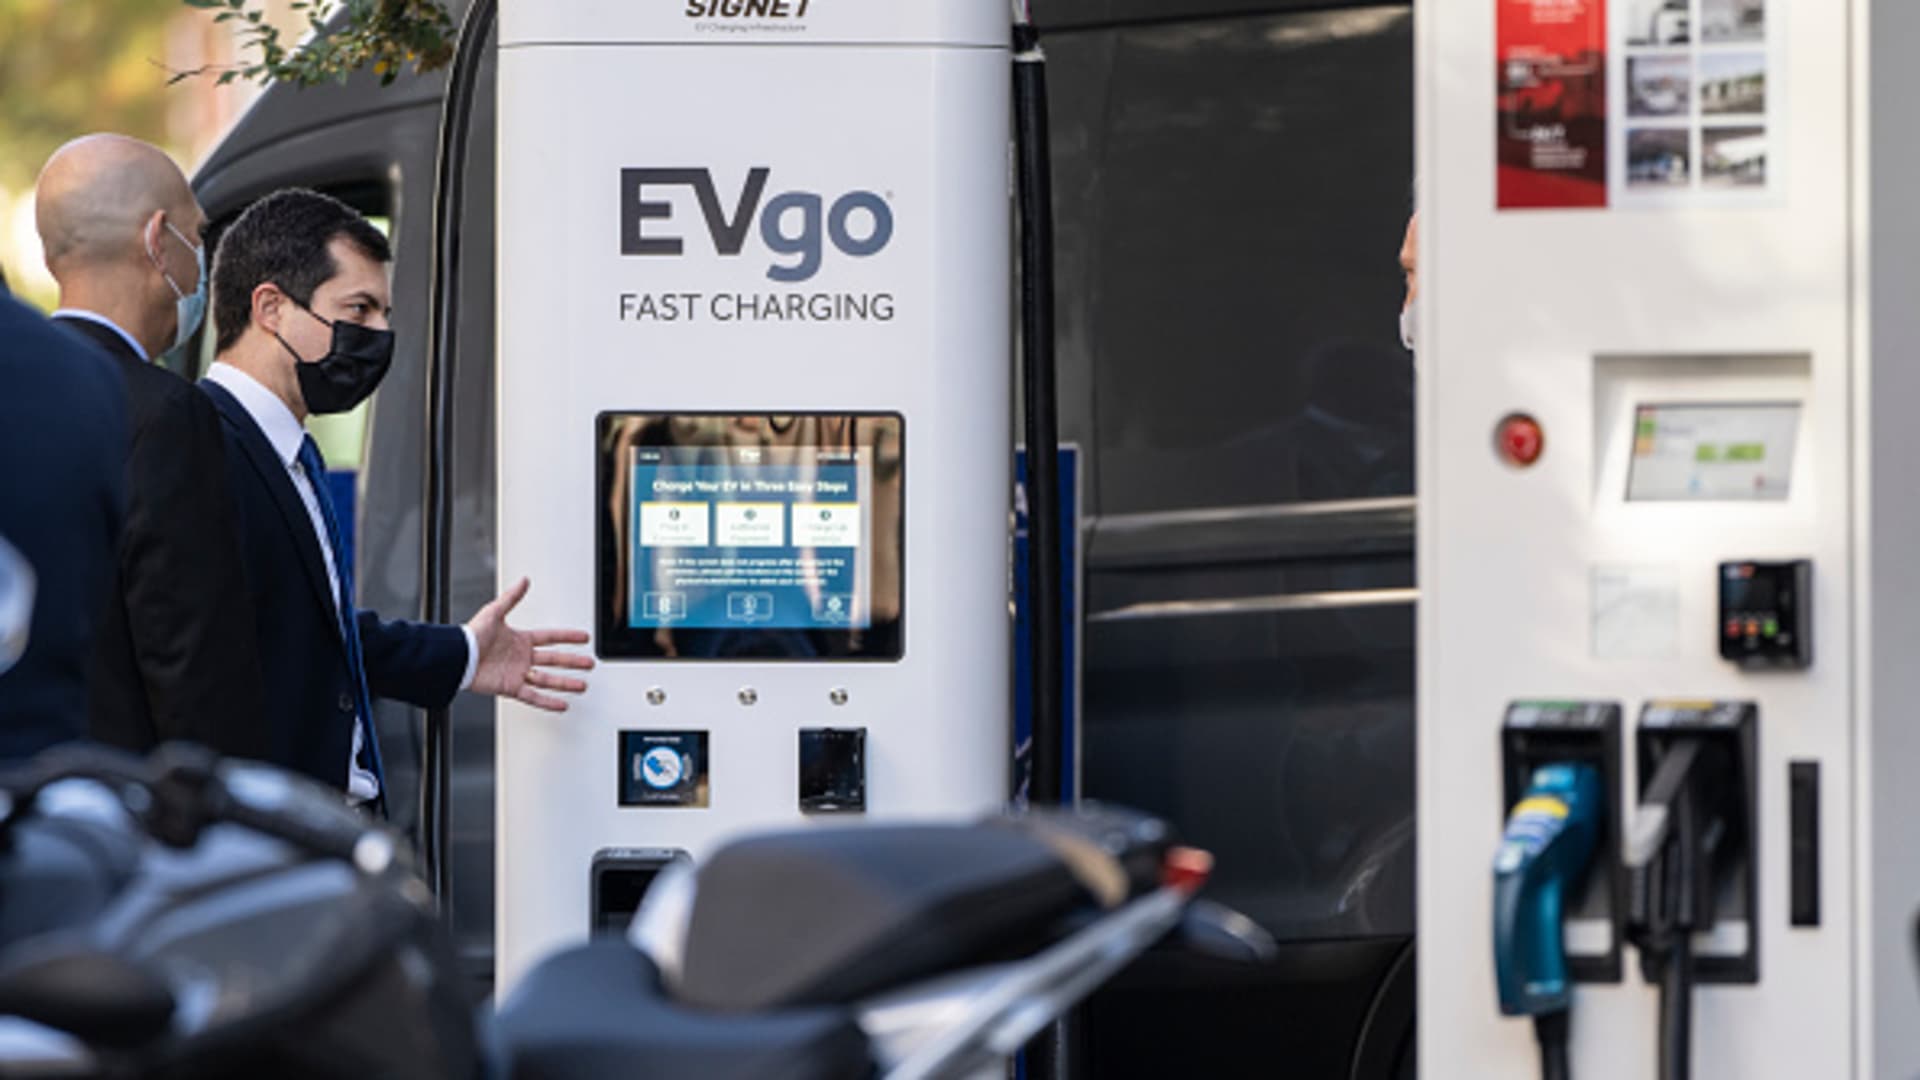 These stocks investors are betting against could rally in this short squeeze, including two EV names